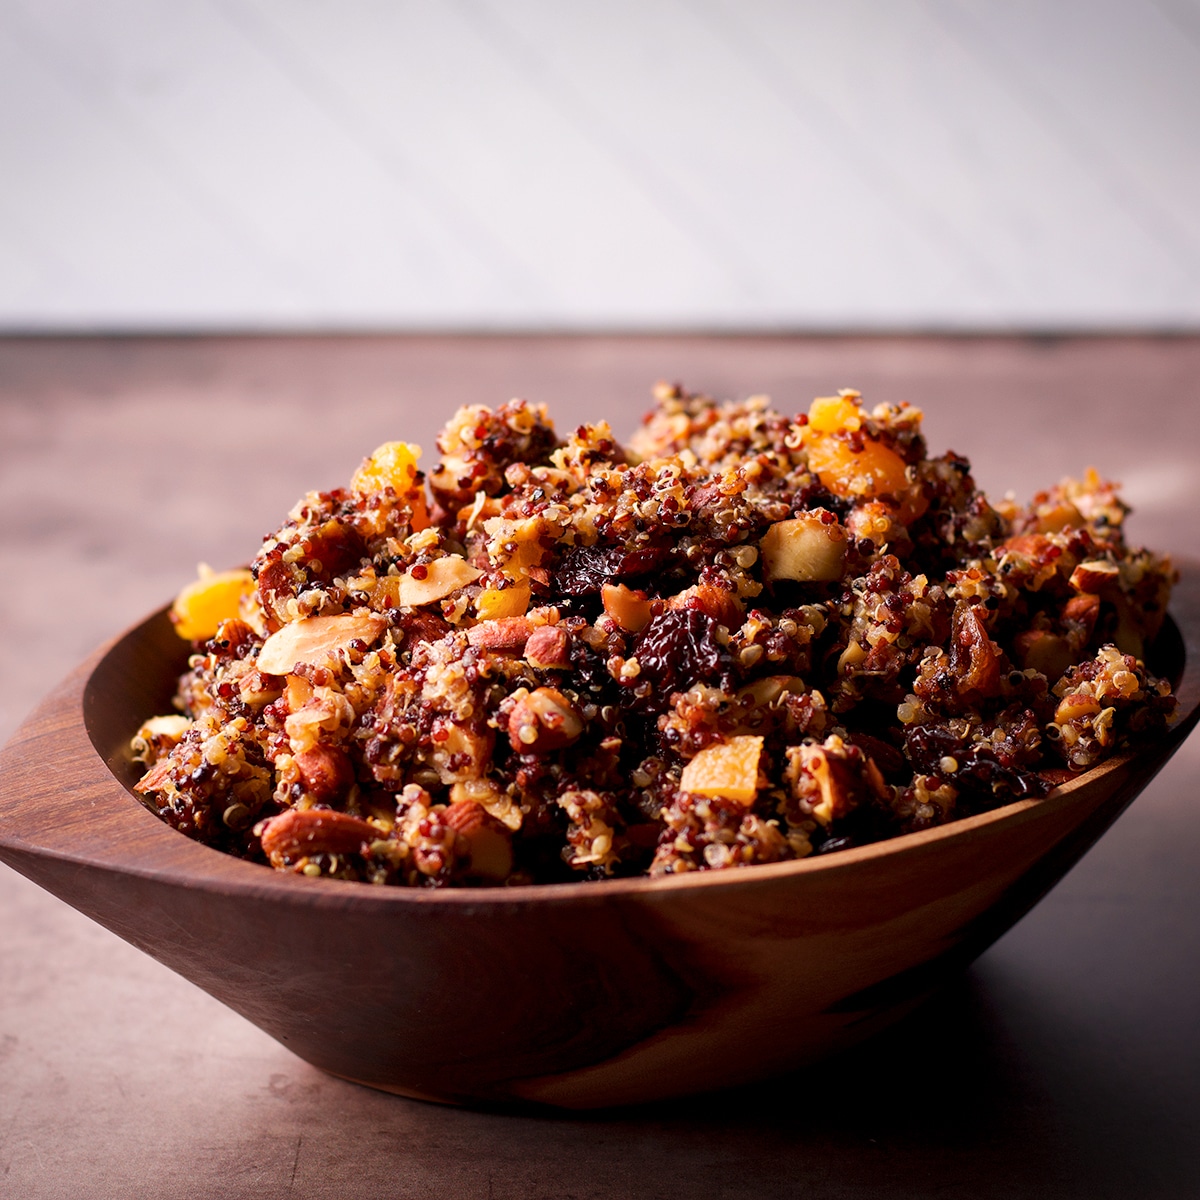 A wood bowl filled with cooked quinoa mixed with chopped nuts and dried fruit.